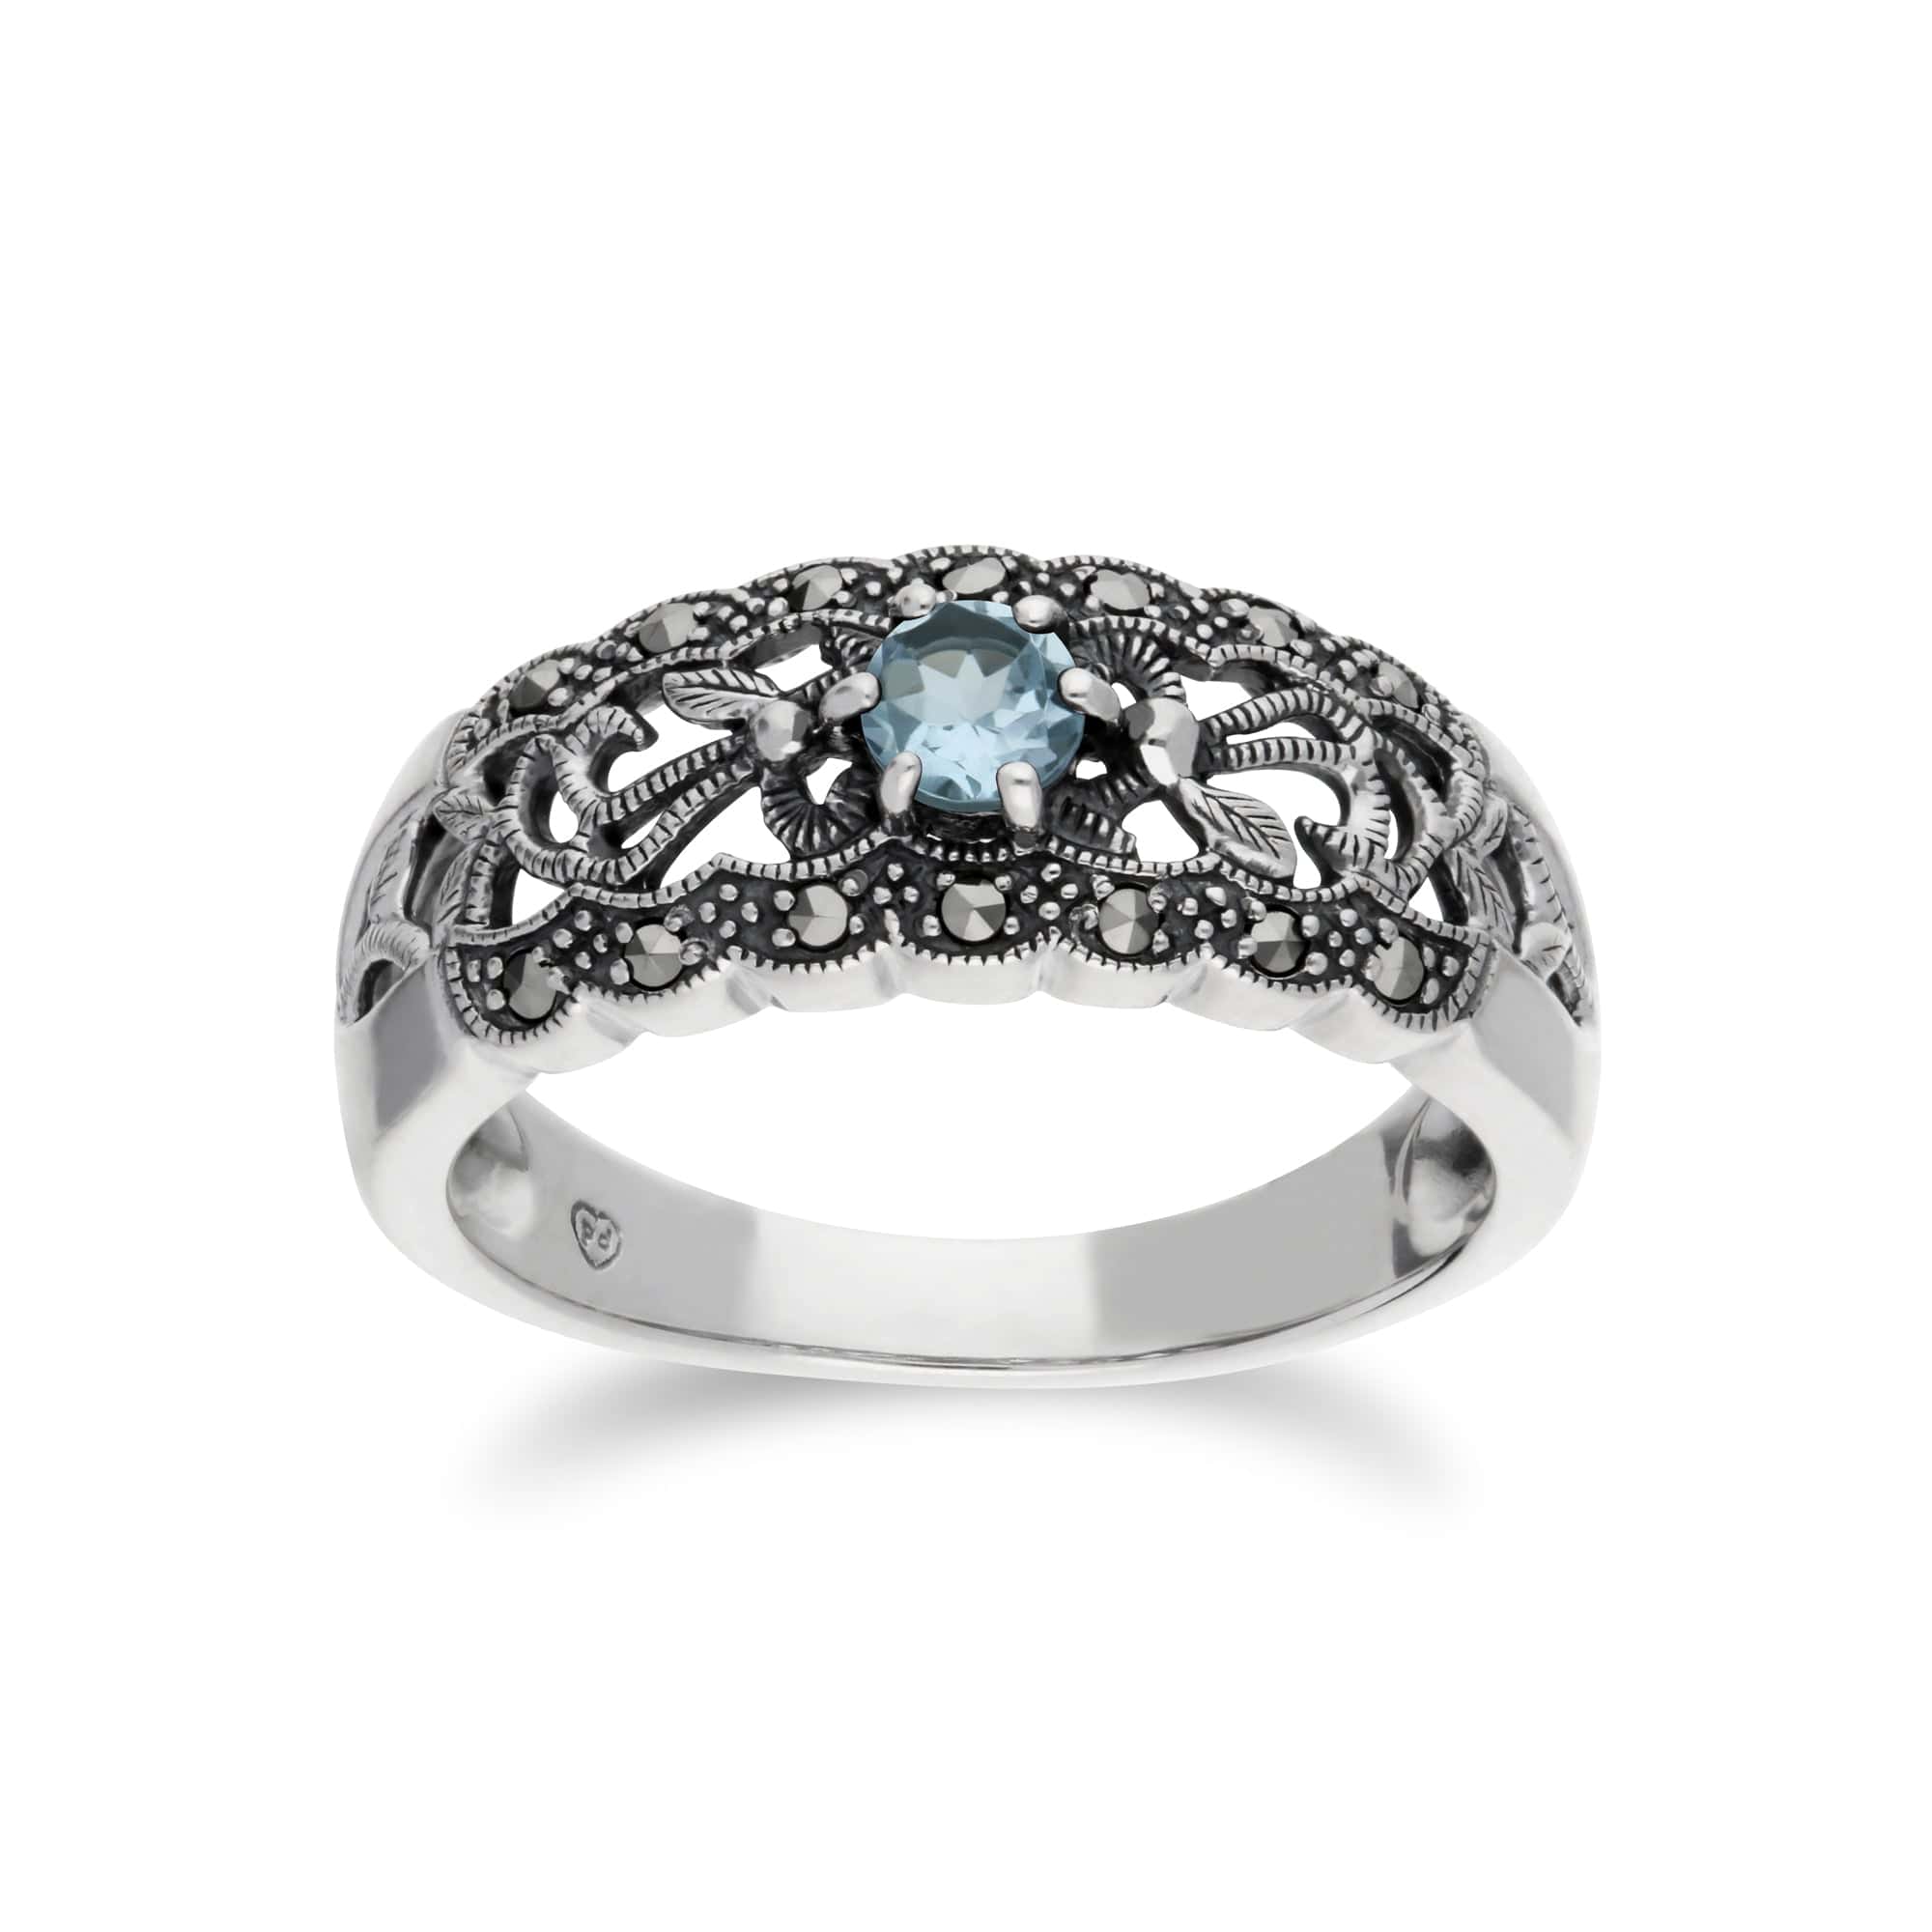 Art Nouveau Style Round Blue Topaz & Marcasite Floral Band Ring in Sterling Silver - Gemondo